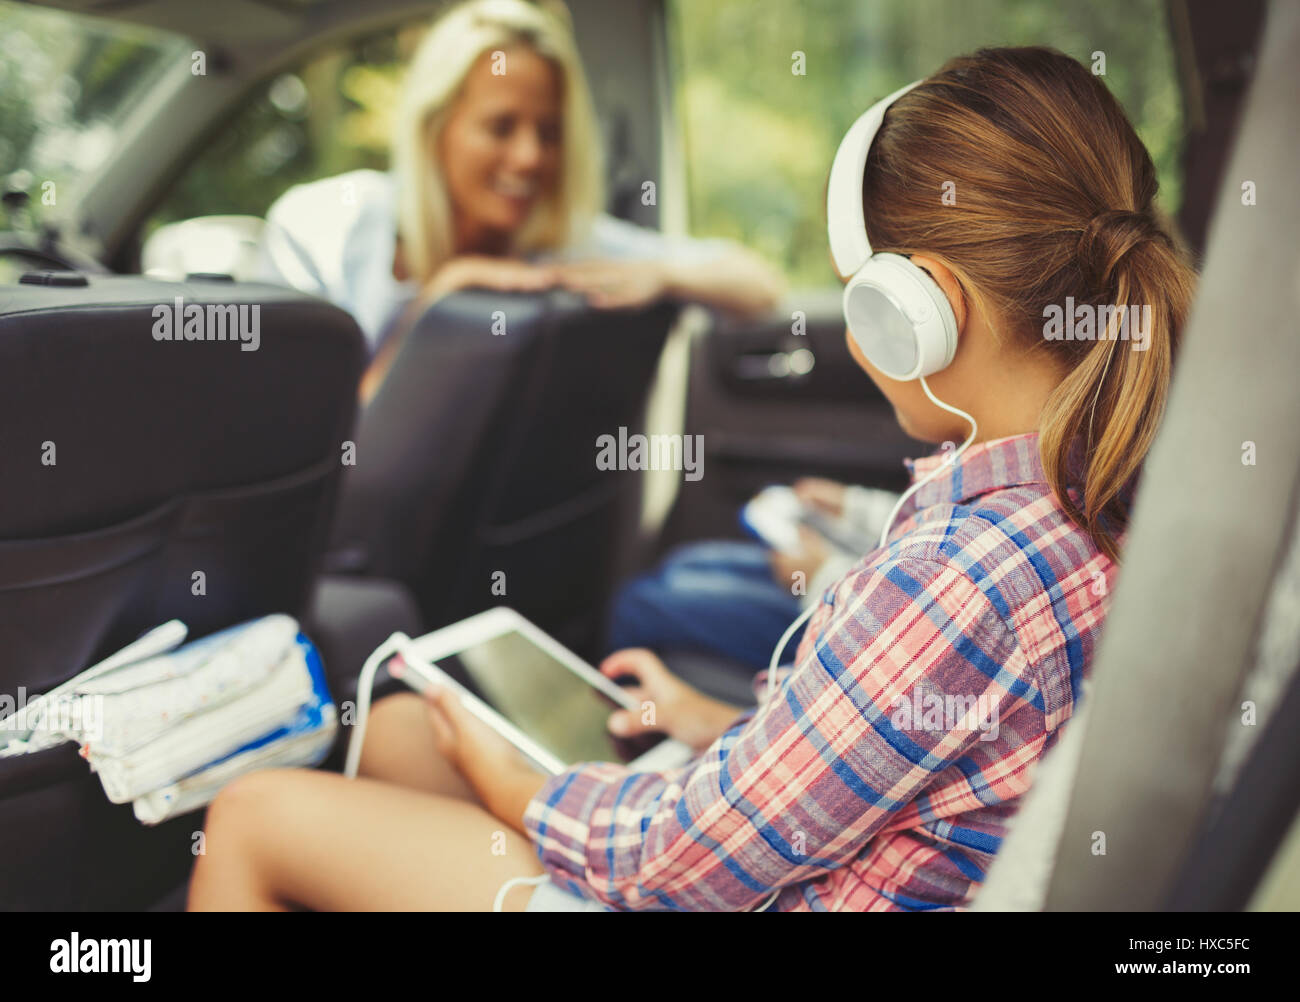 Girl with headphones using digital tablet watching video in back seat of car Stock Photo